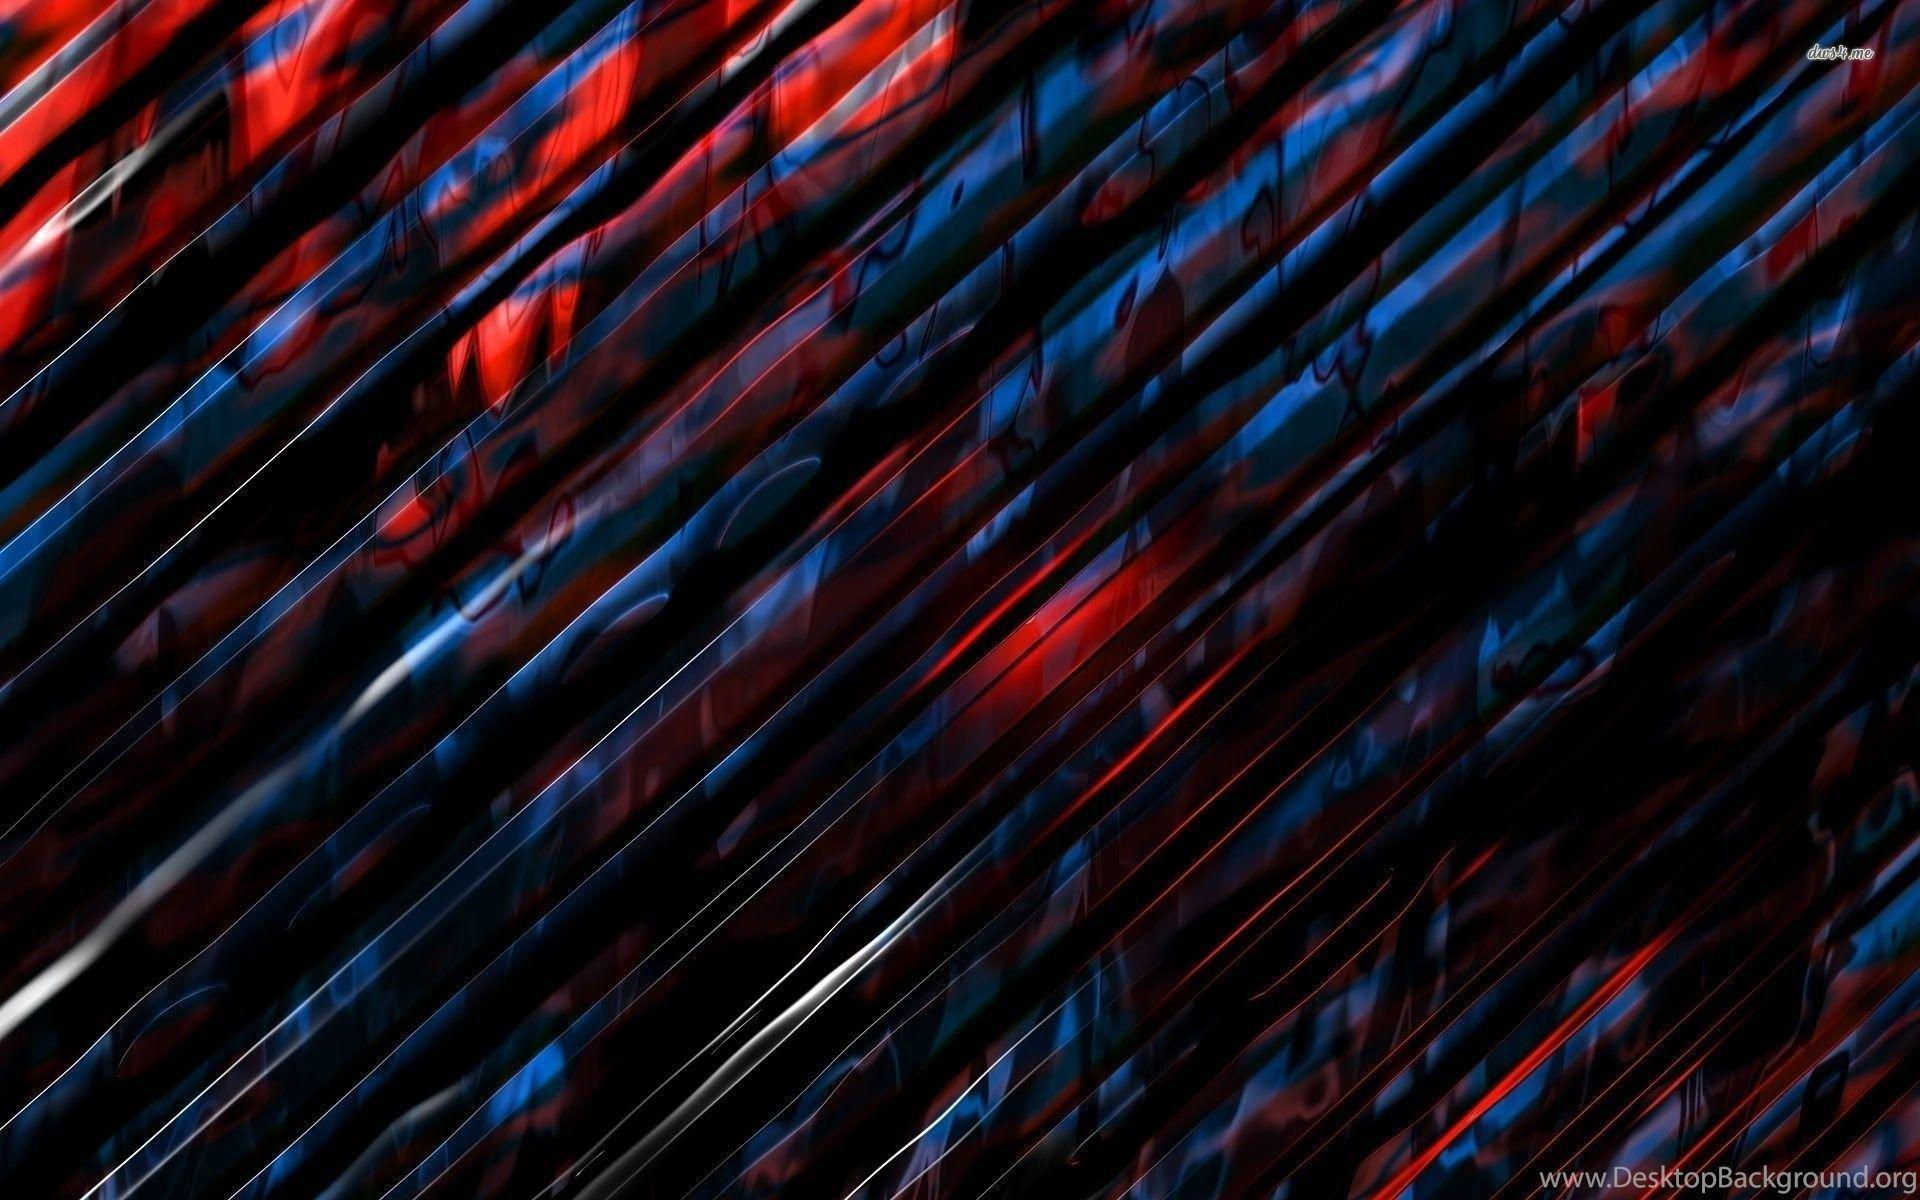 Metallic Shiny Red And Blue Curves Wallpaper Desktop Background